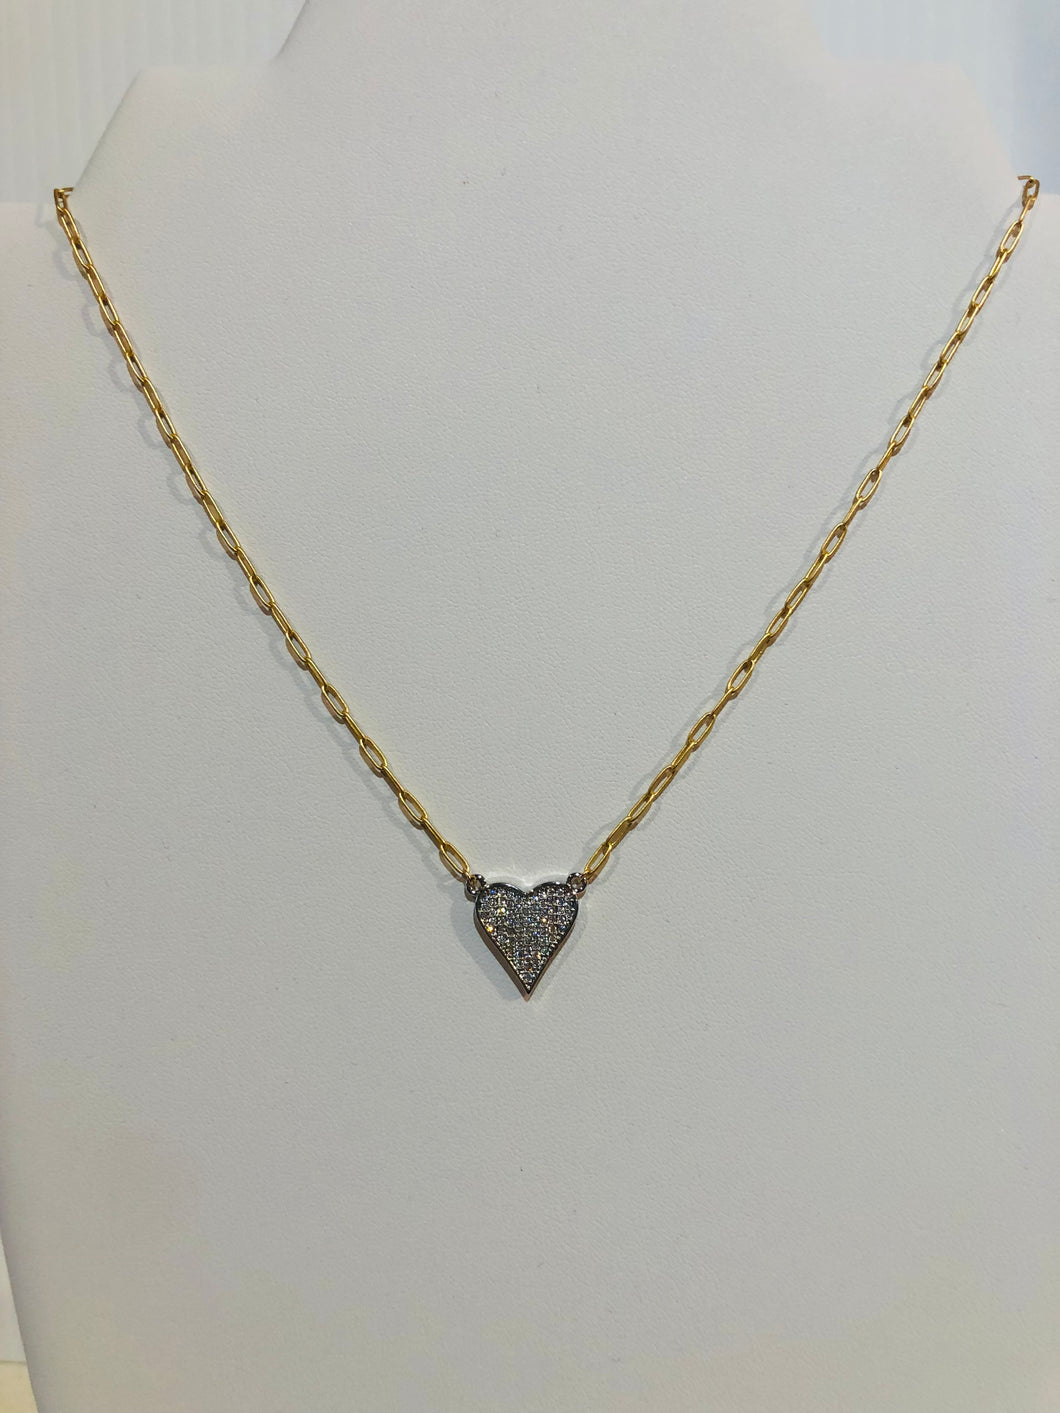 The Loving Heart Necklace